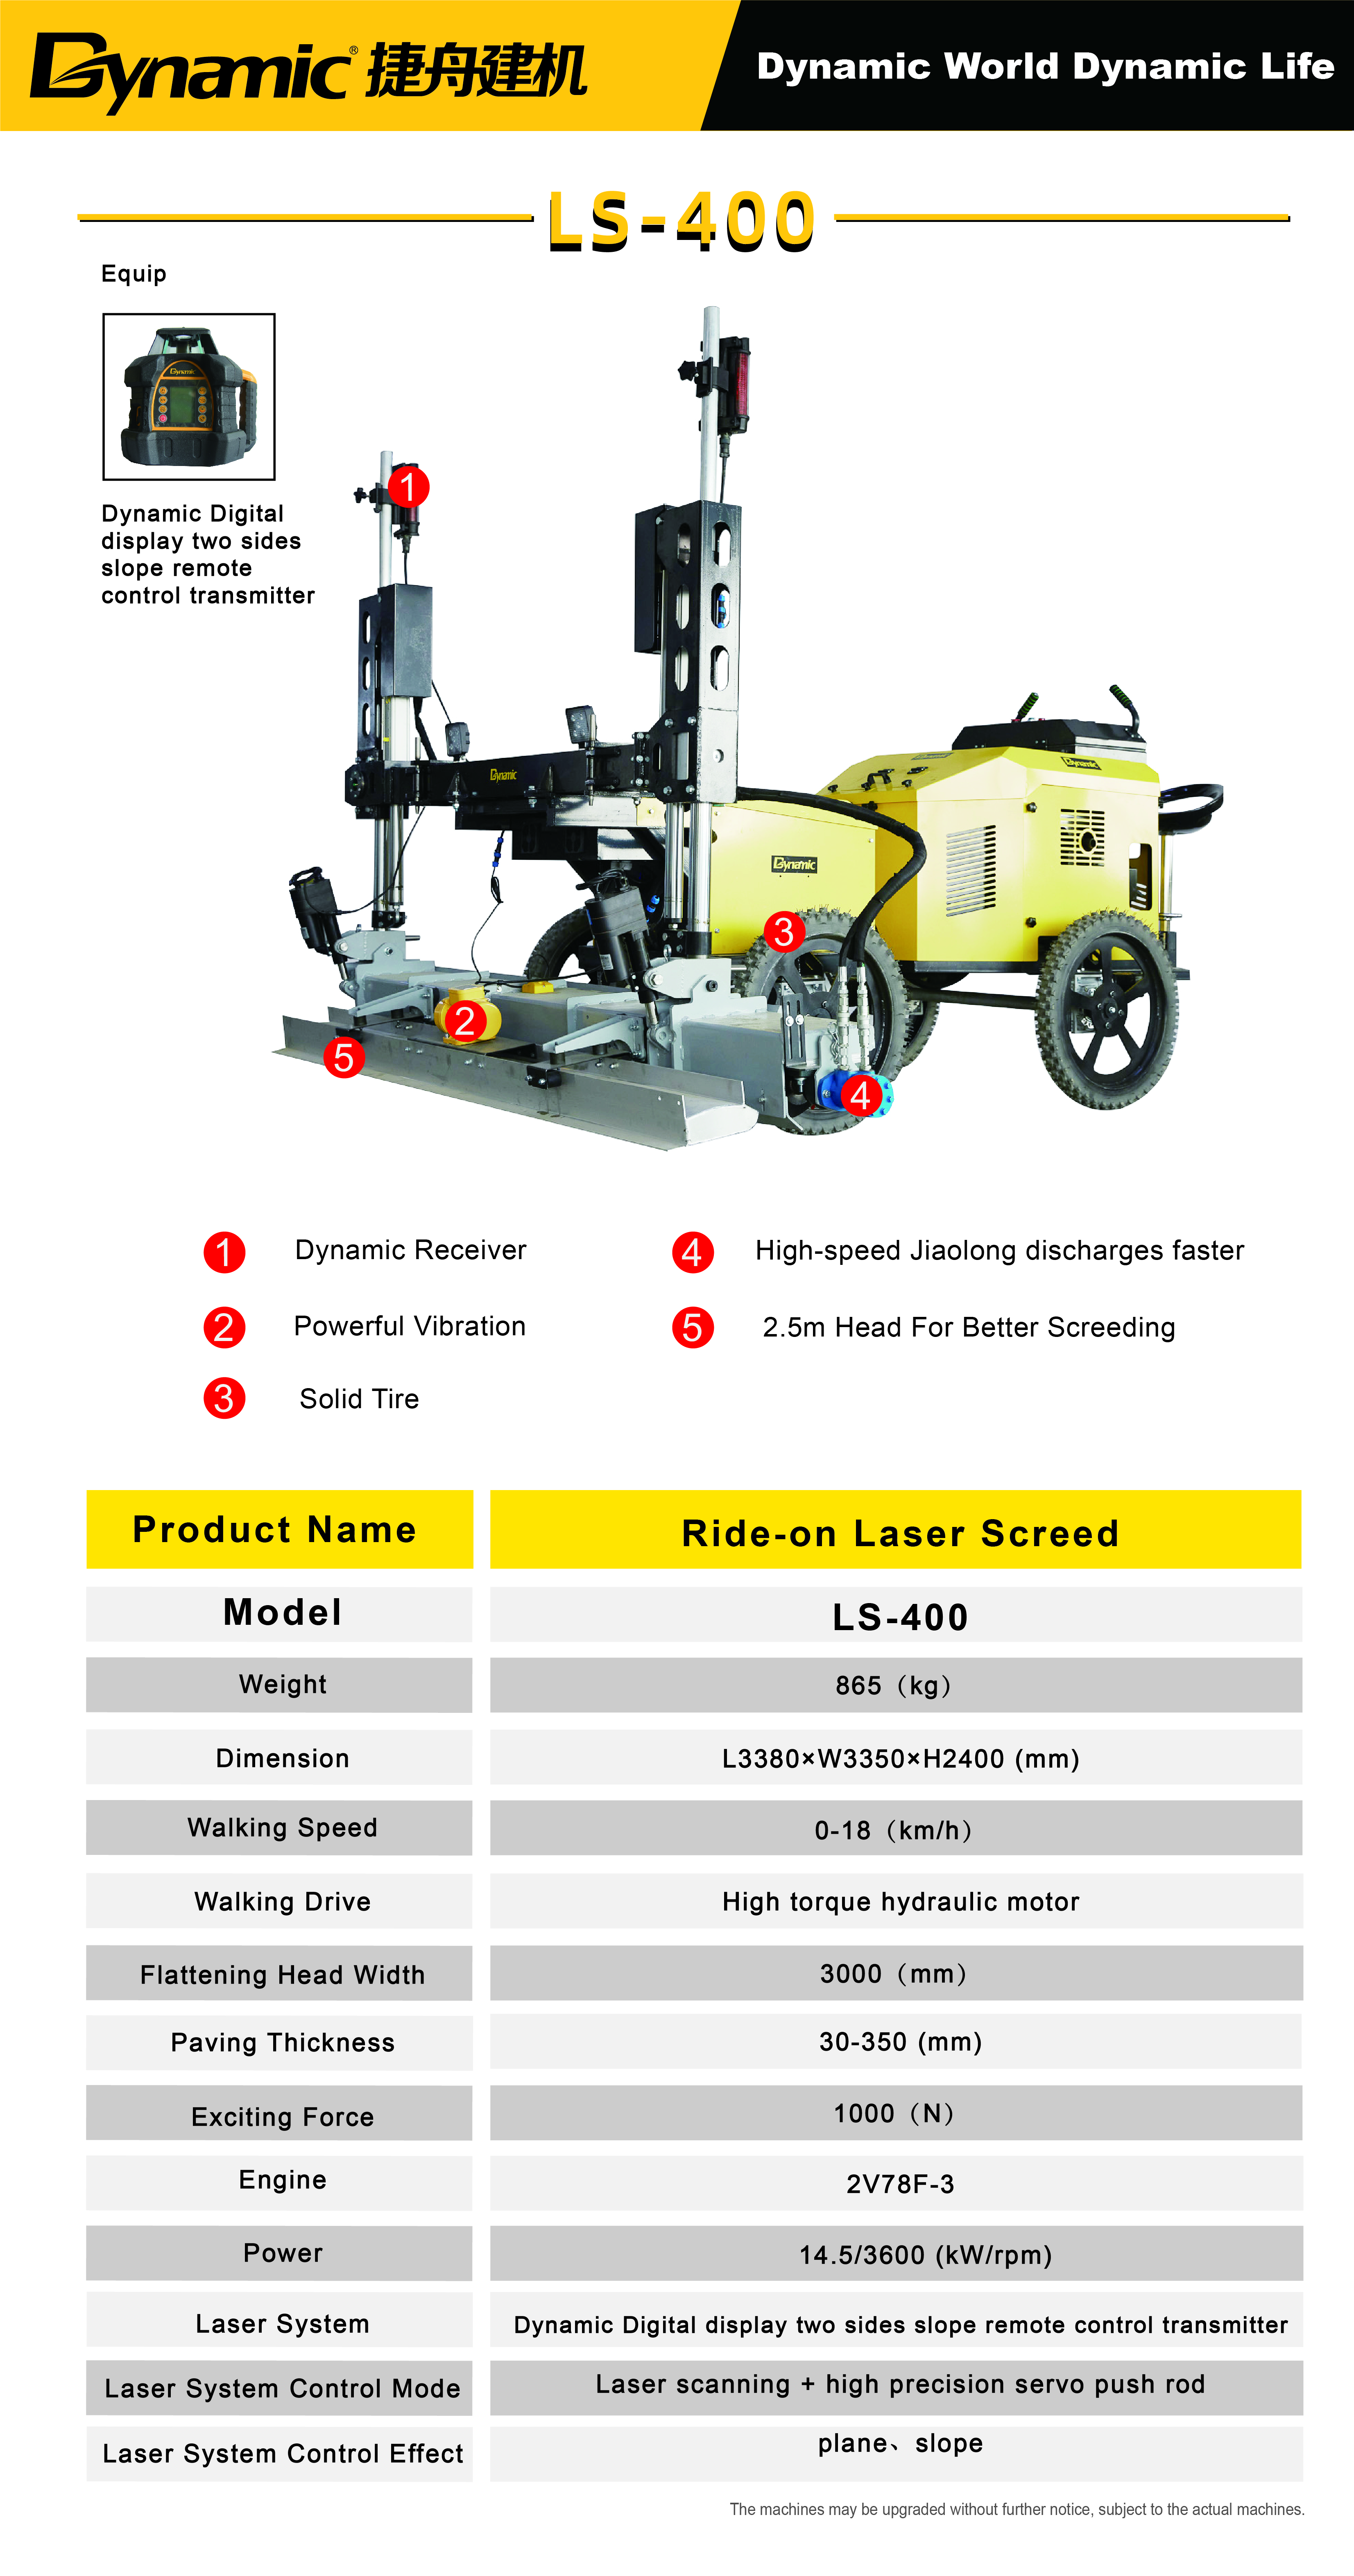 Ride-on Laser Screed LS-400